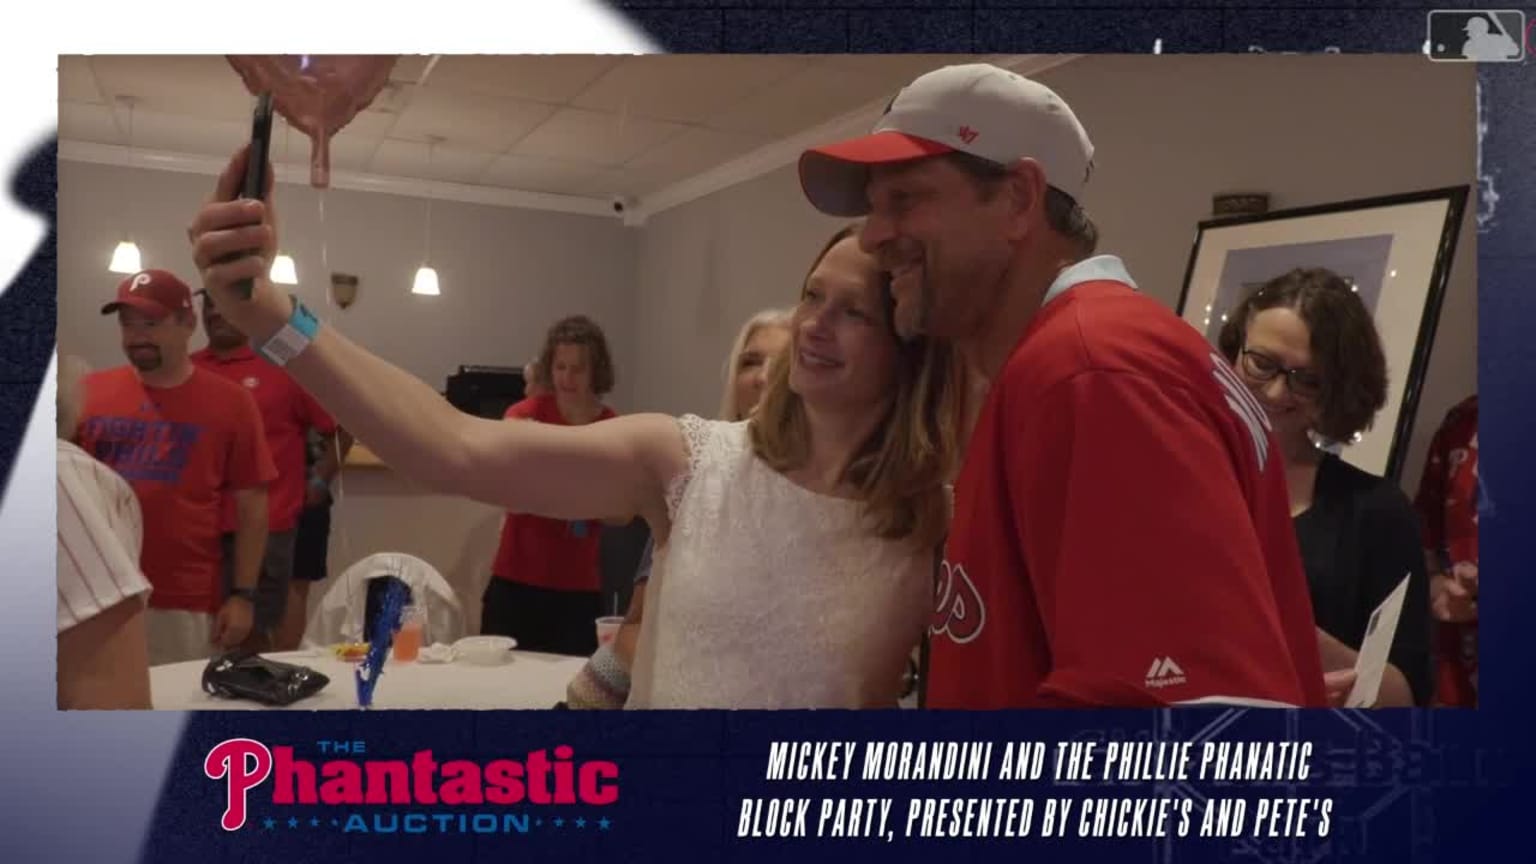 Block Party with Phillies Alumni Mickey Morandini and The Phillie Phanatic,  Presented by Chickie's and Pete's